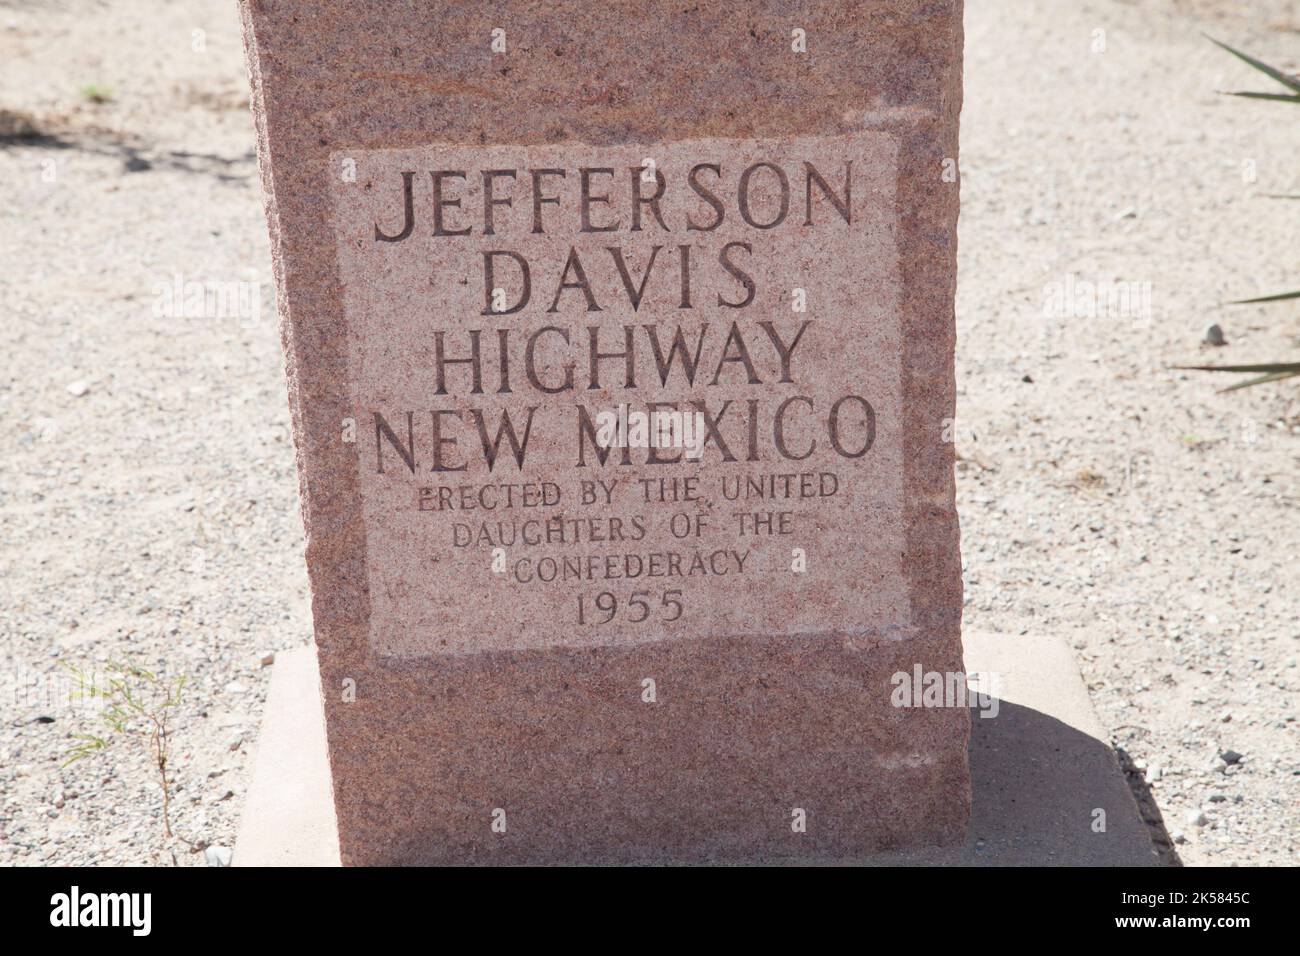 DEMING, NEW MEXICO - September 23, 2015: Jefferson Davis Highway Marker, New Mexico Stock Photo